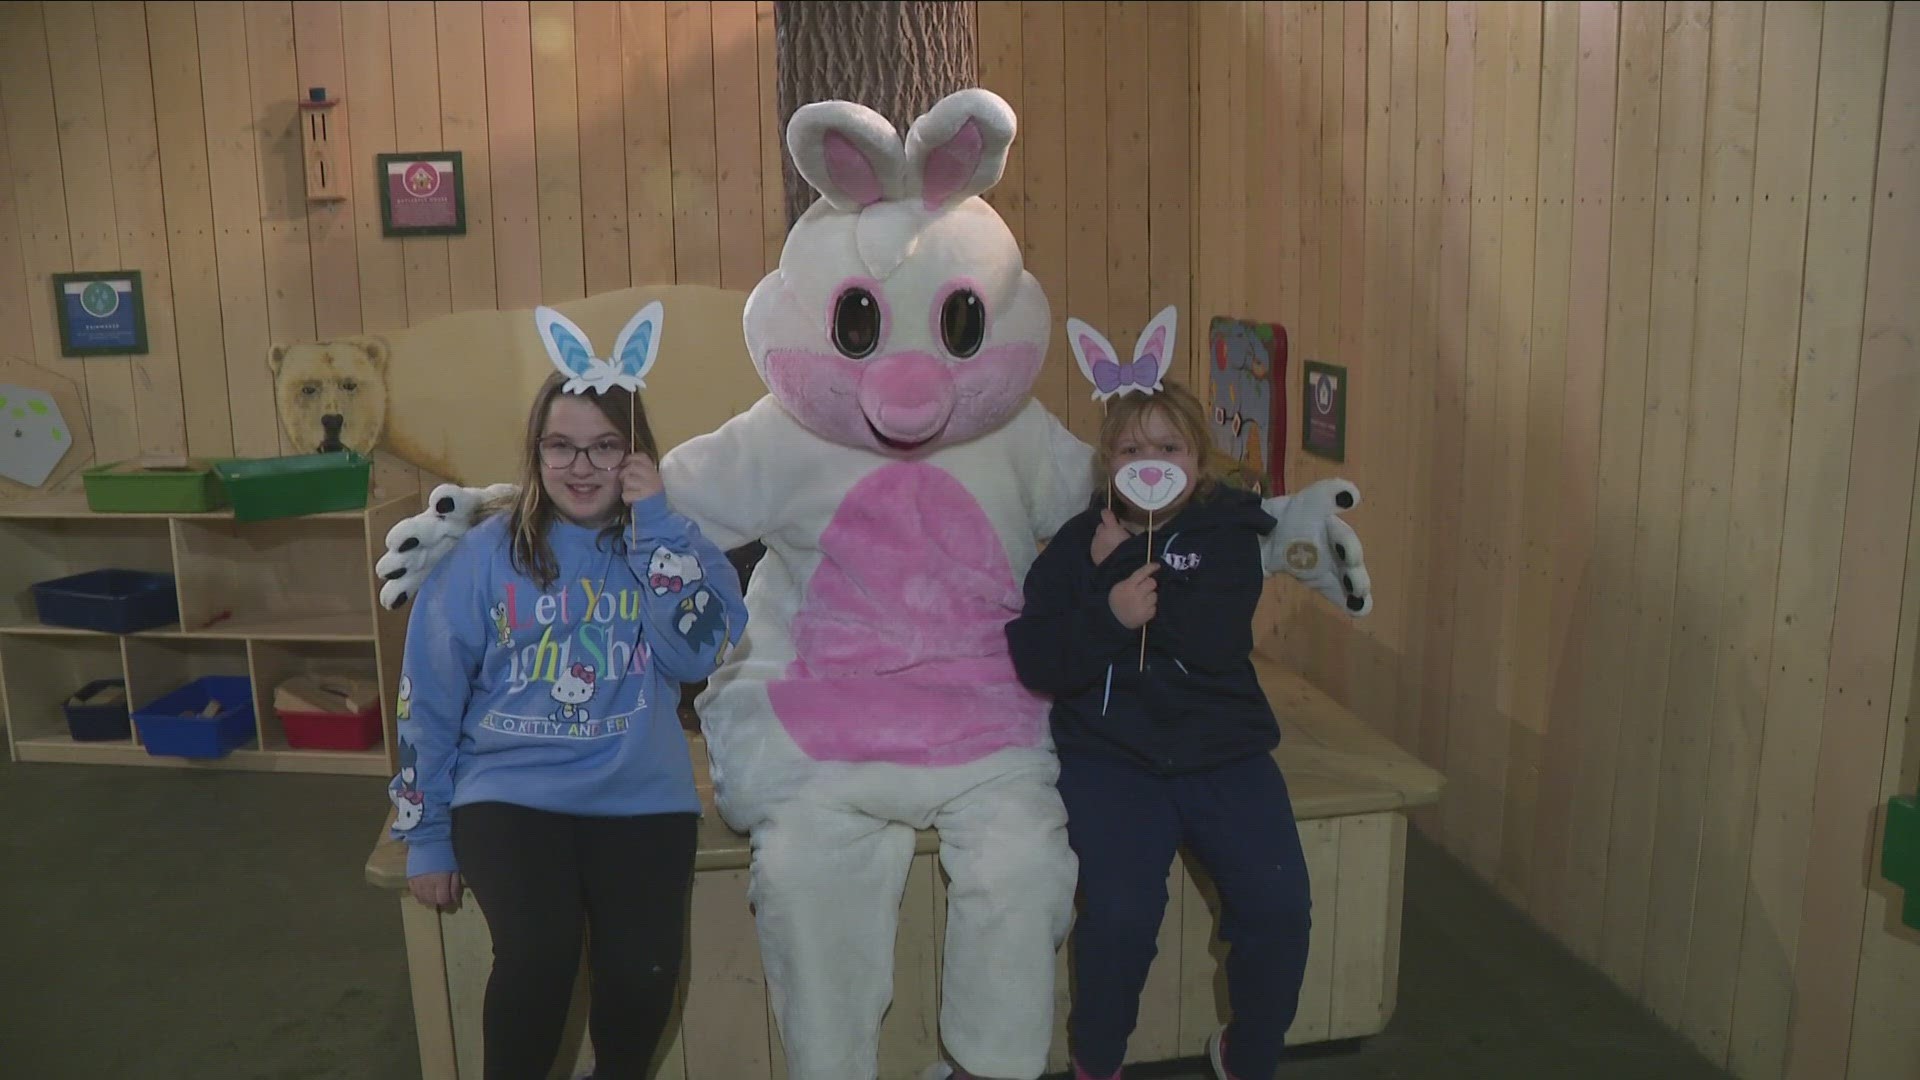 Saturday's event included a candy trail, photo-ops with the Easter bunny, and a golden Easter egg hunt.